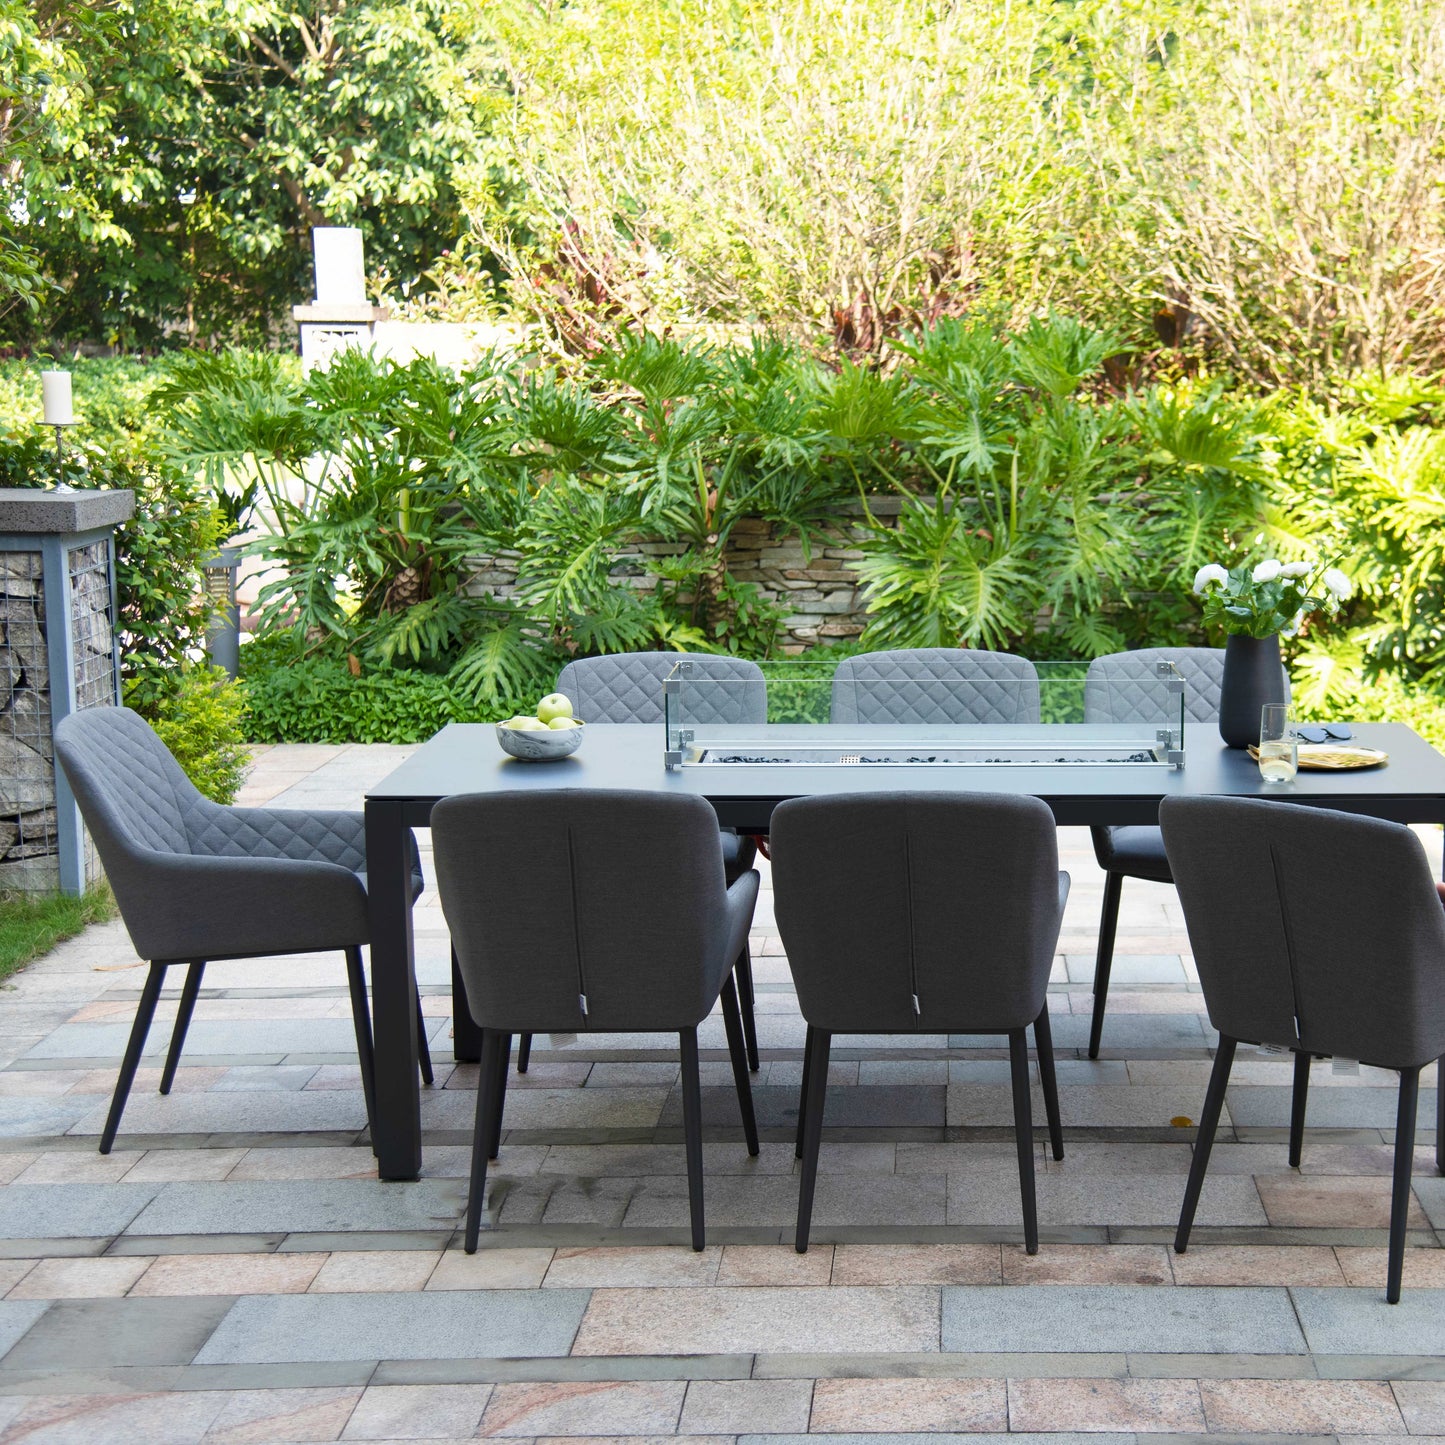 Outdoor Fabric Zest 8 Seat Rectangular Dining Set - With Fire Pit Table